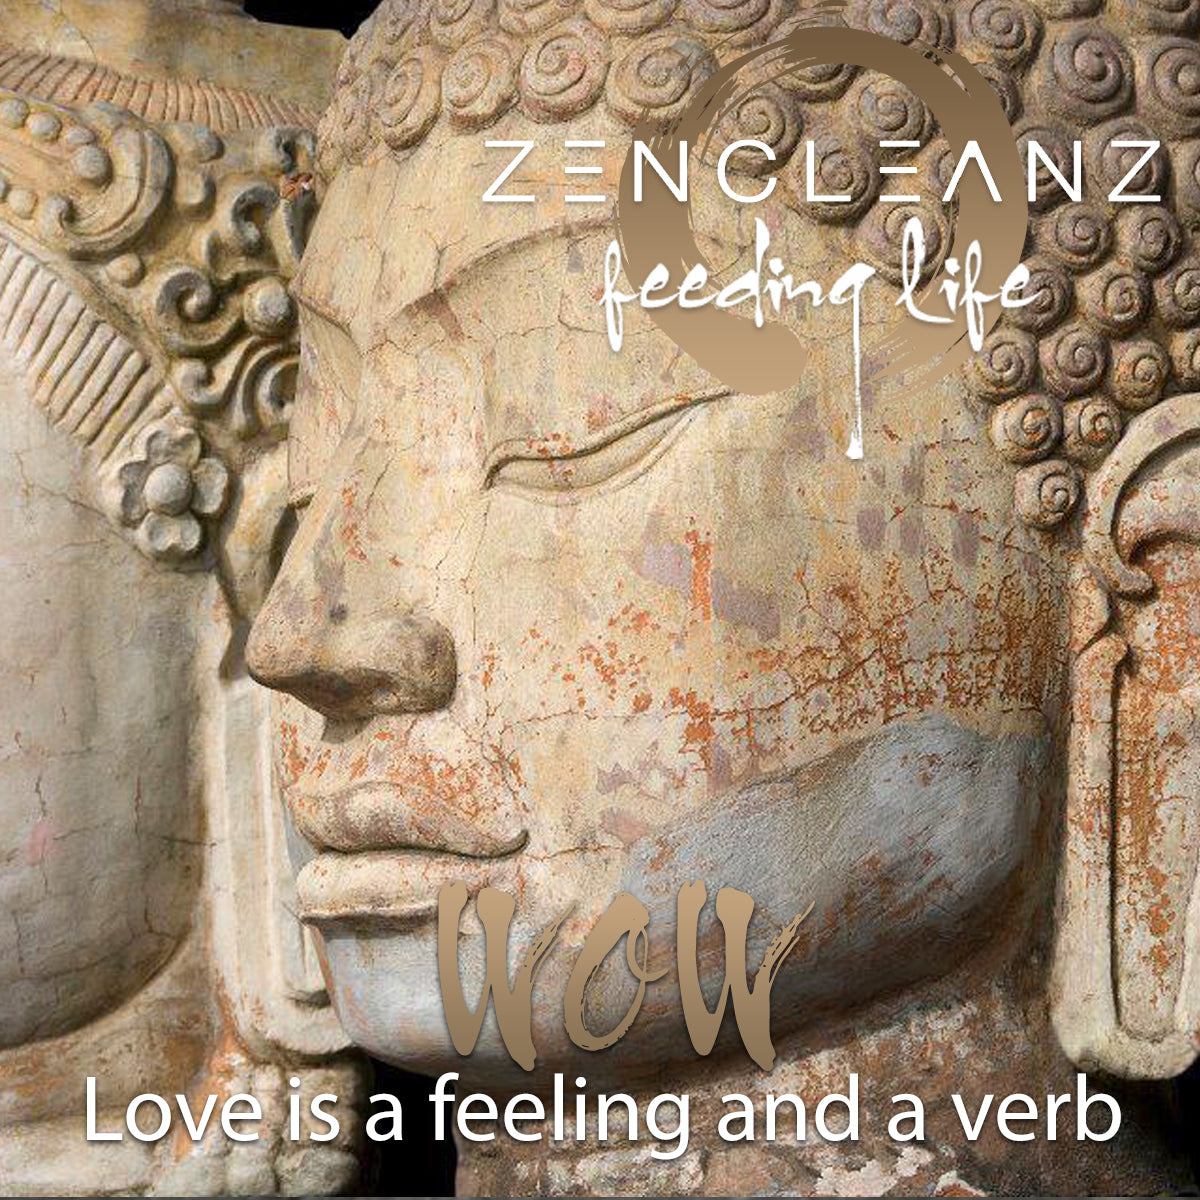 WOW (Words of Wisdom): Love is a feeling and a verb